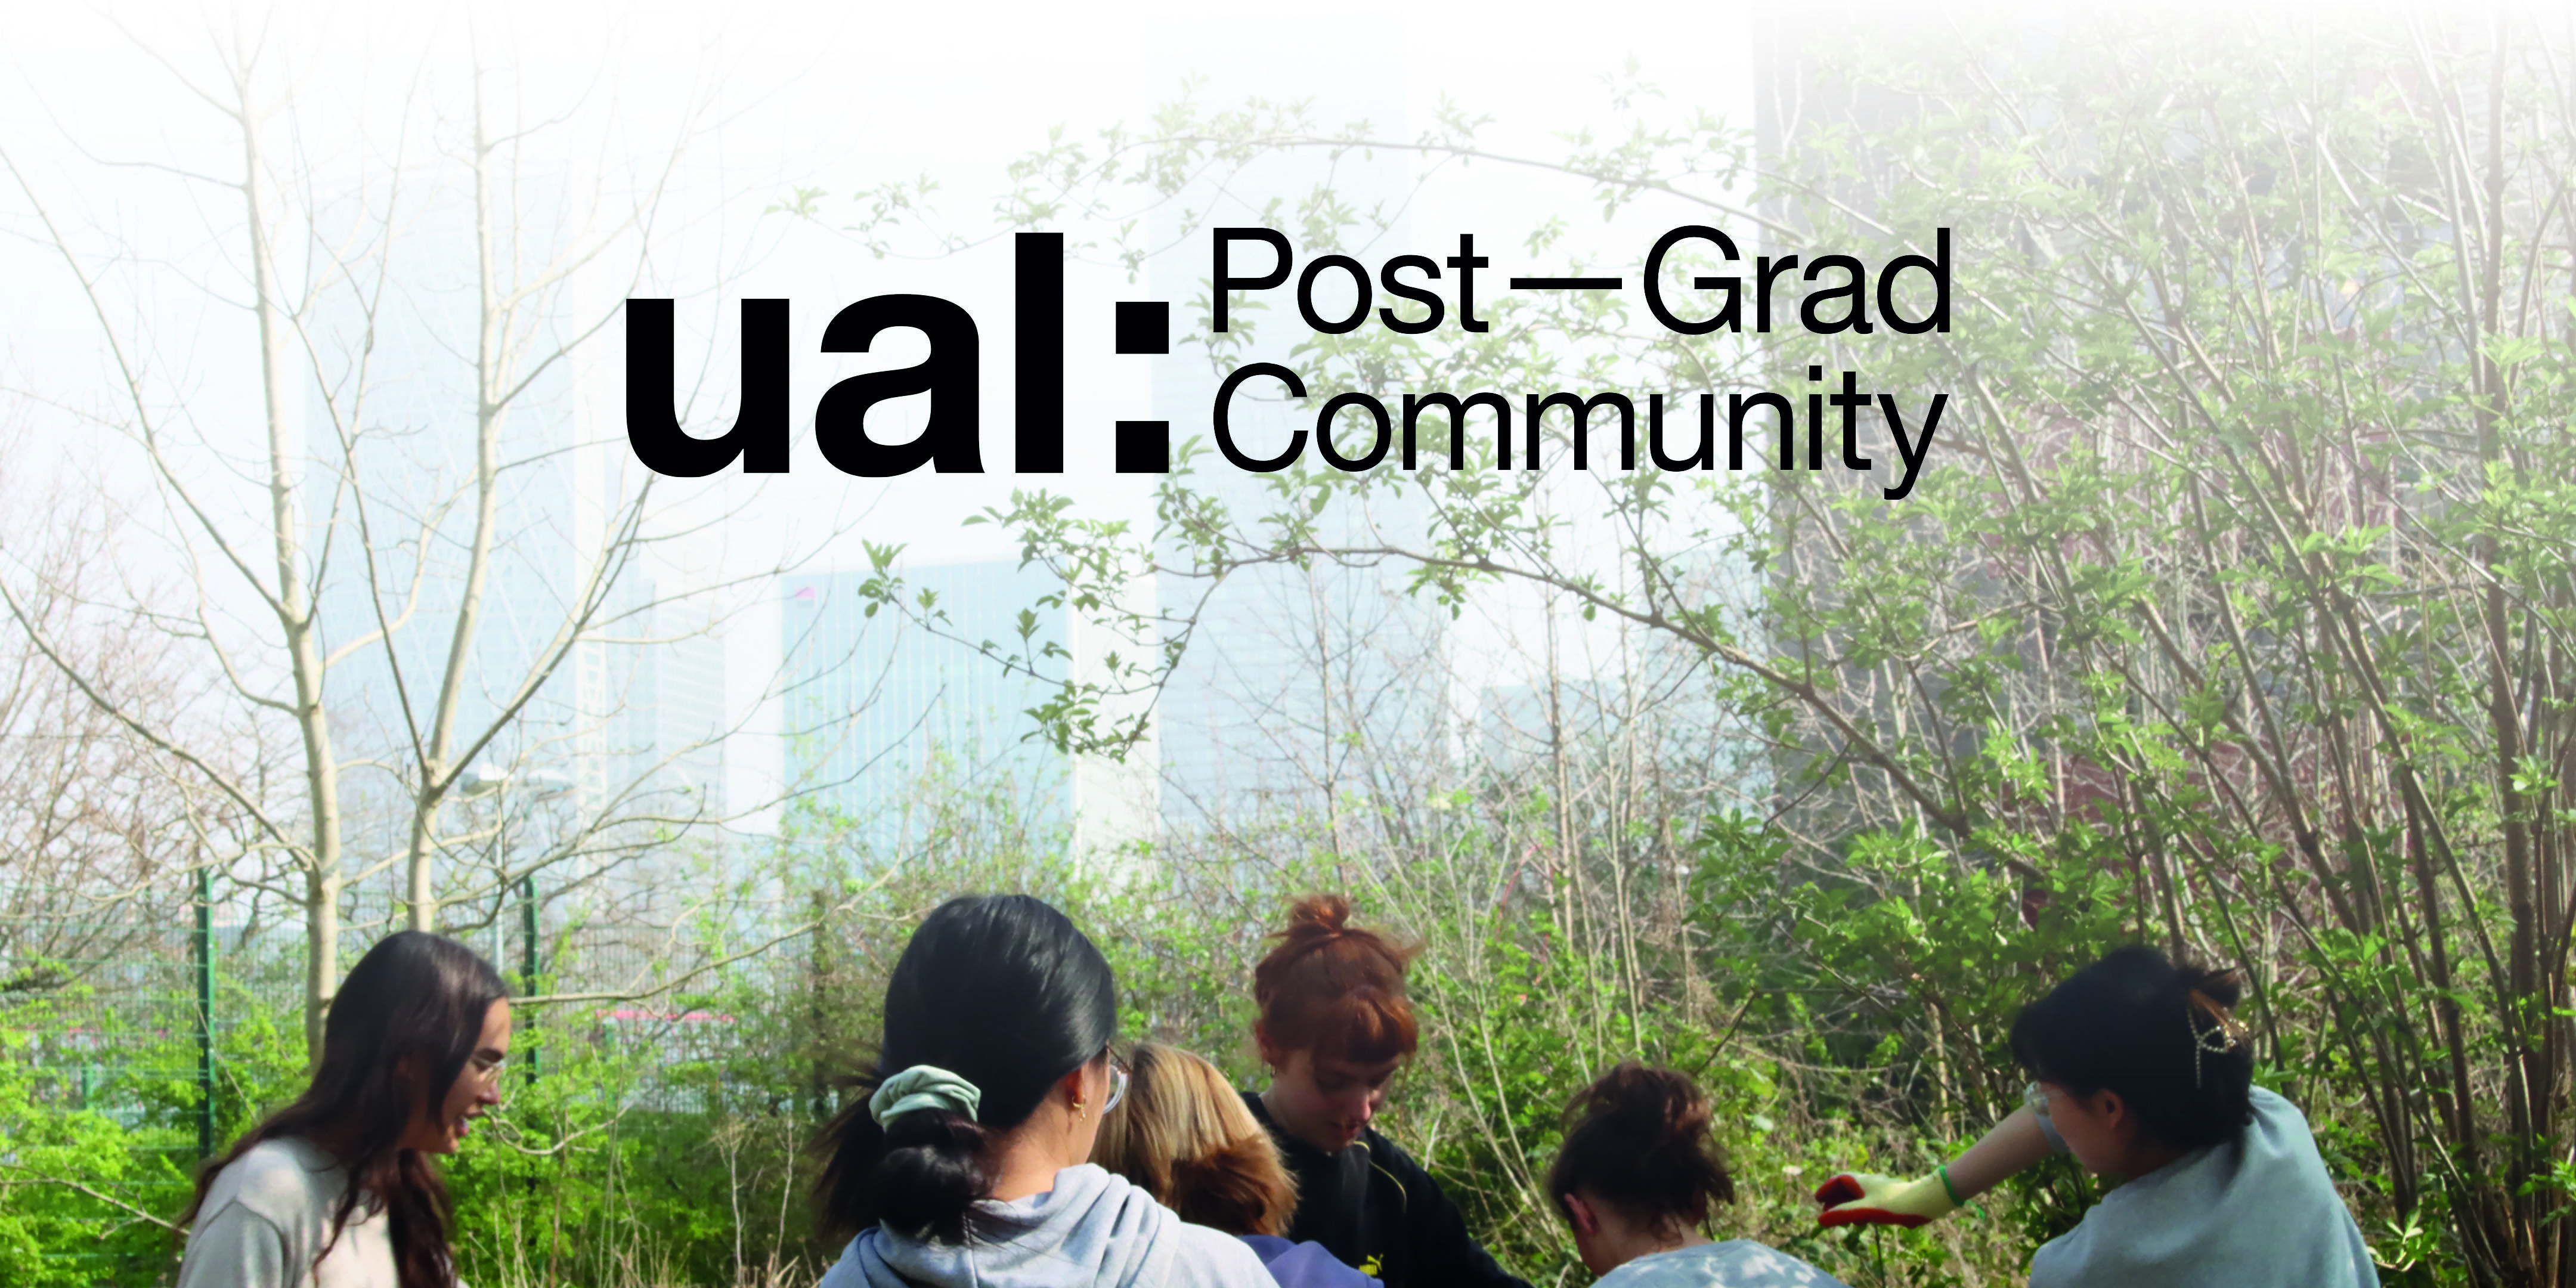 Big Welcome: Introduction to Post-Grad Community